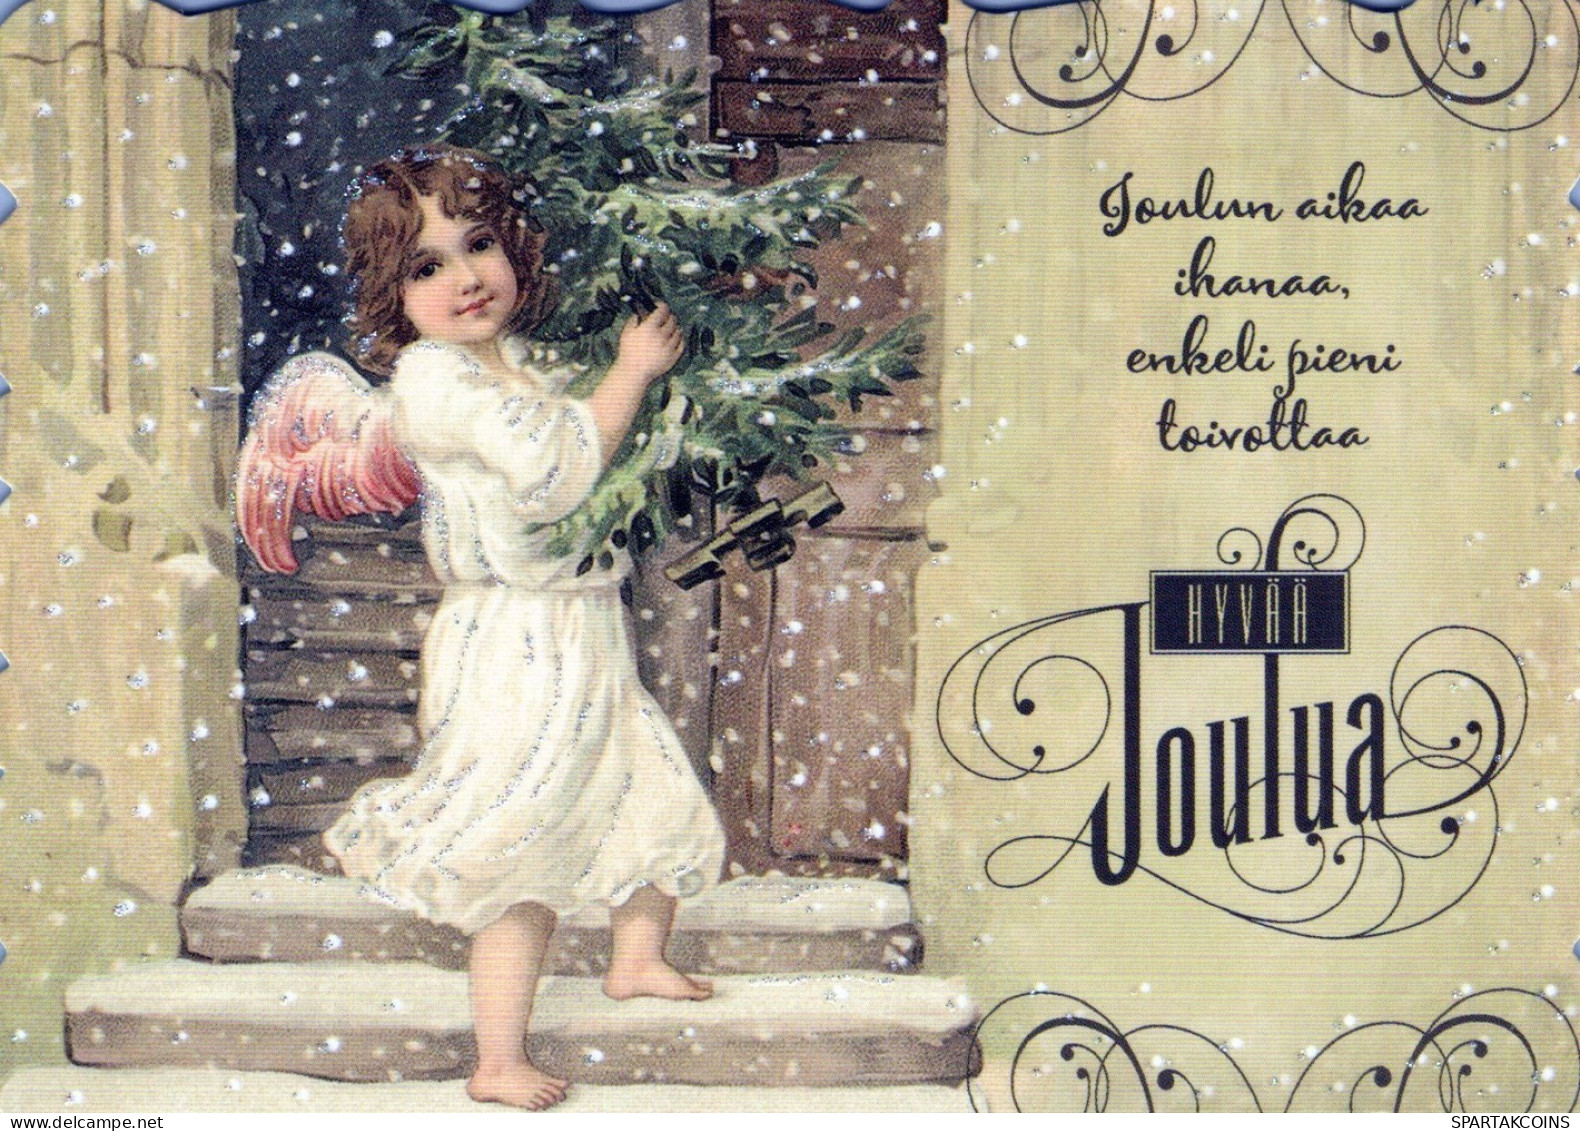 ANGELO Buon Anno Natale Vintage Cartolina CPSM #PAH557.IT - Angels